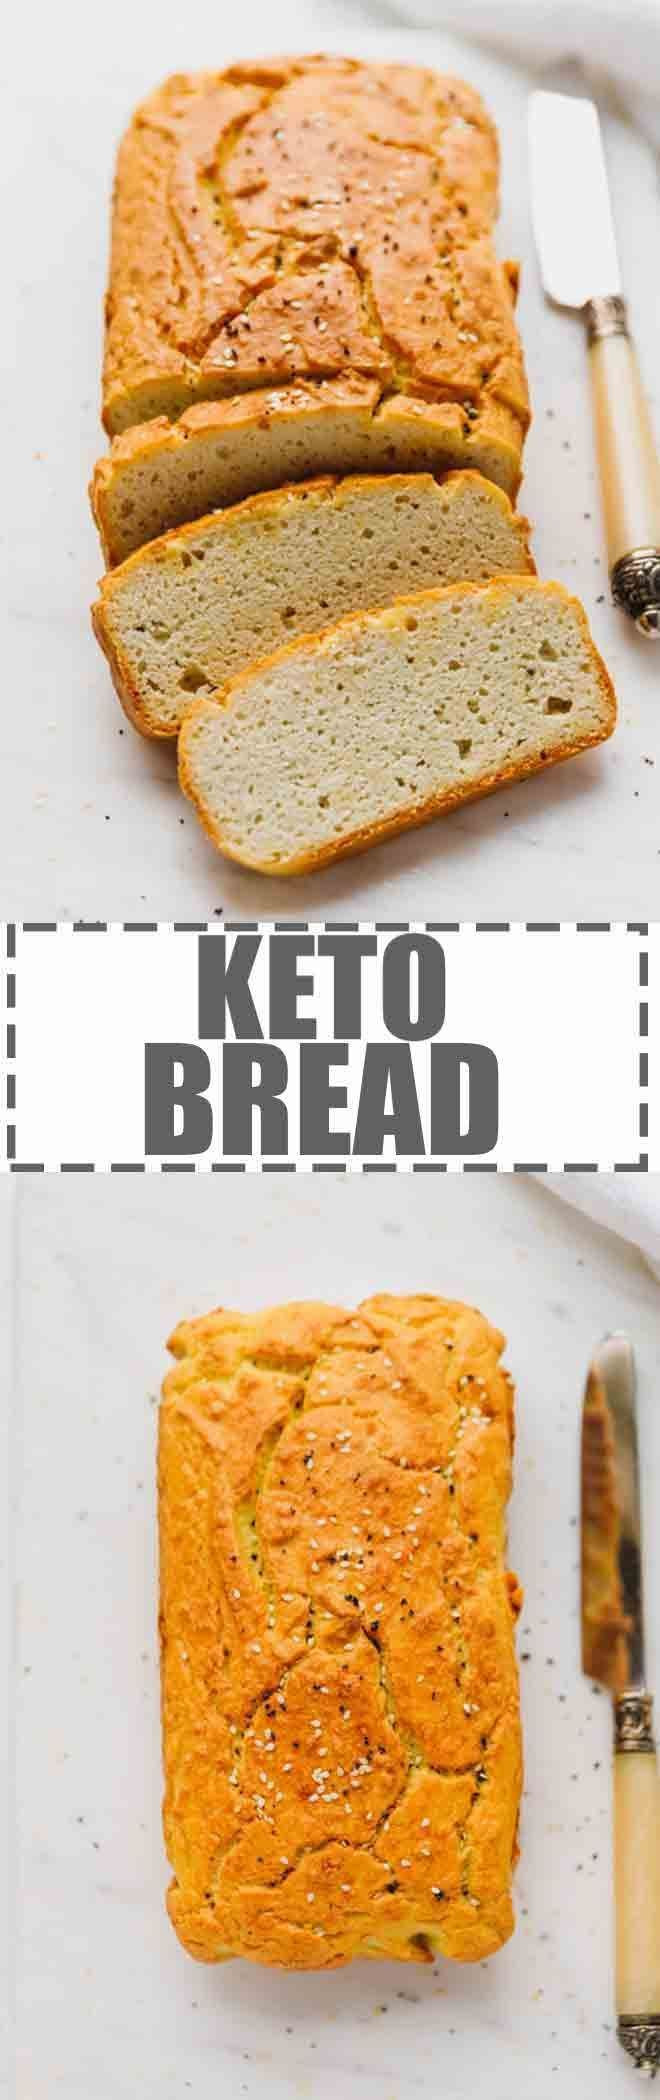 Not Eggy Keto Sandwich Bread
 Keto Bread Loaf low carb non eggy gluten and sugar